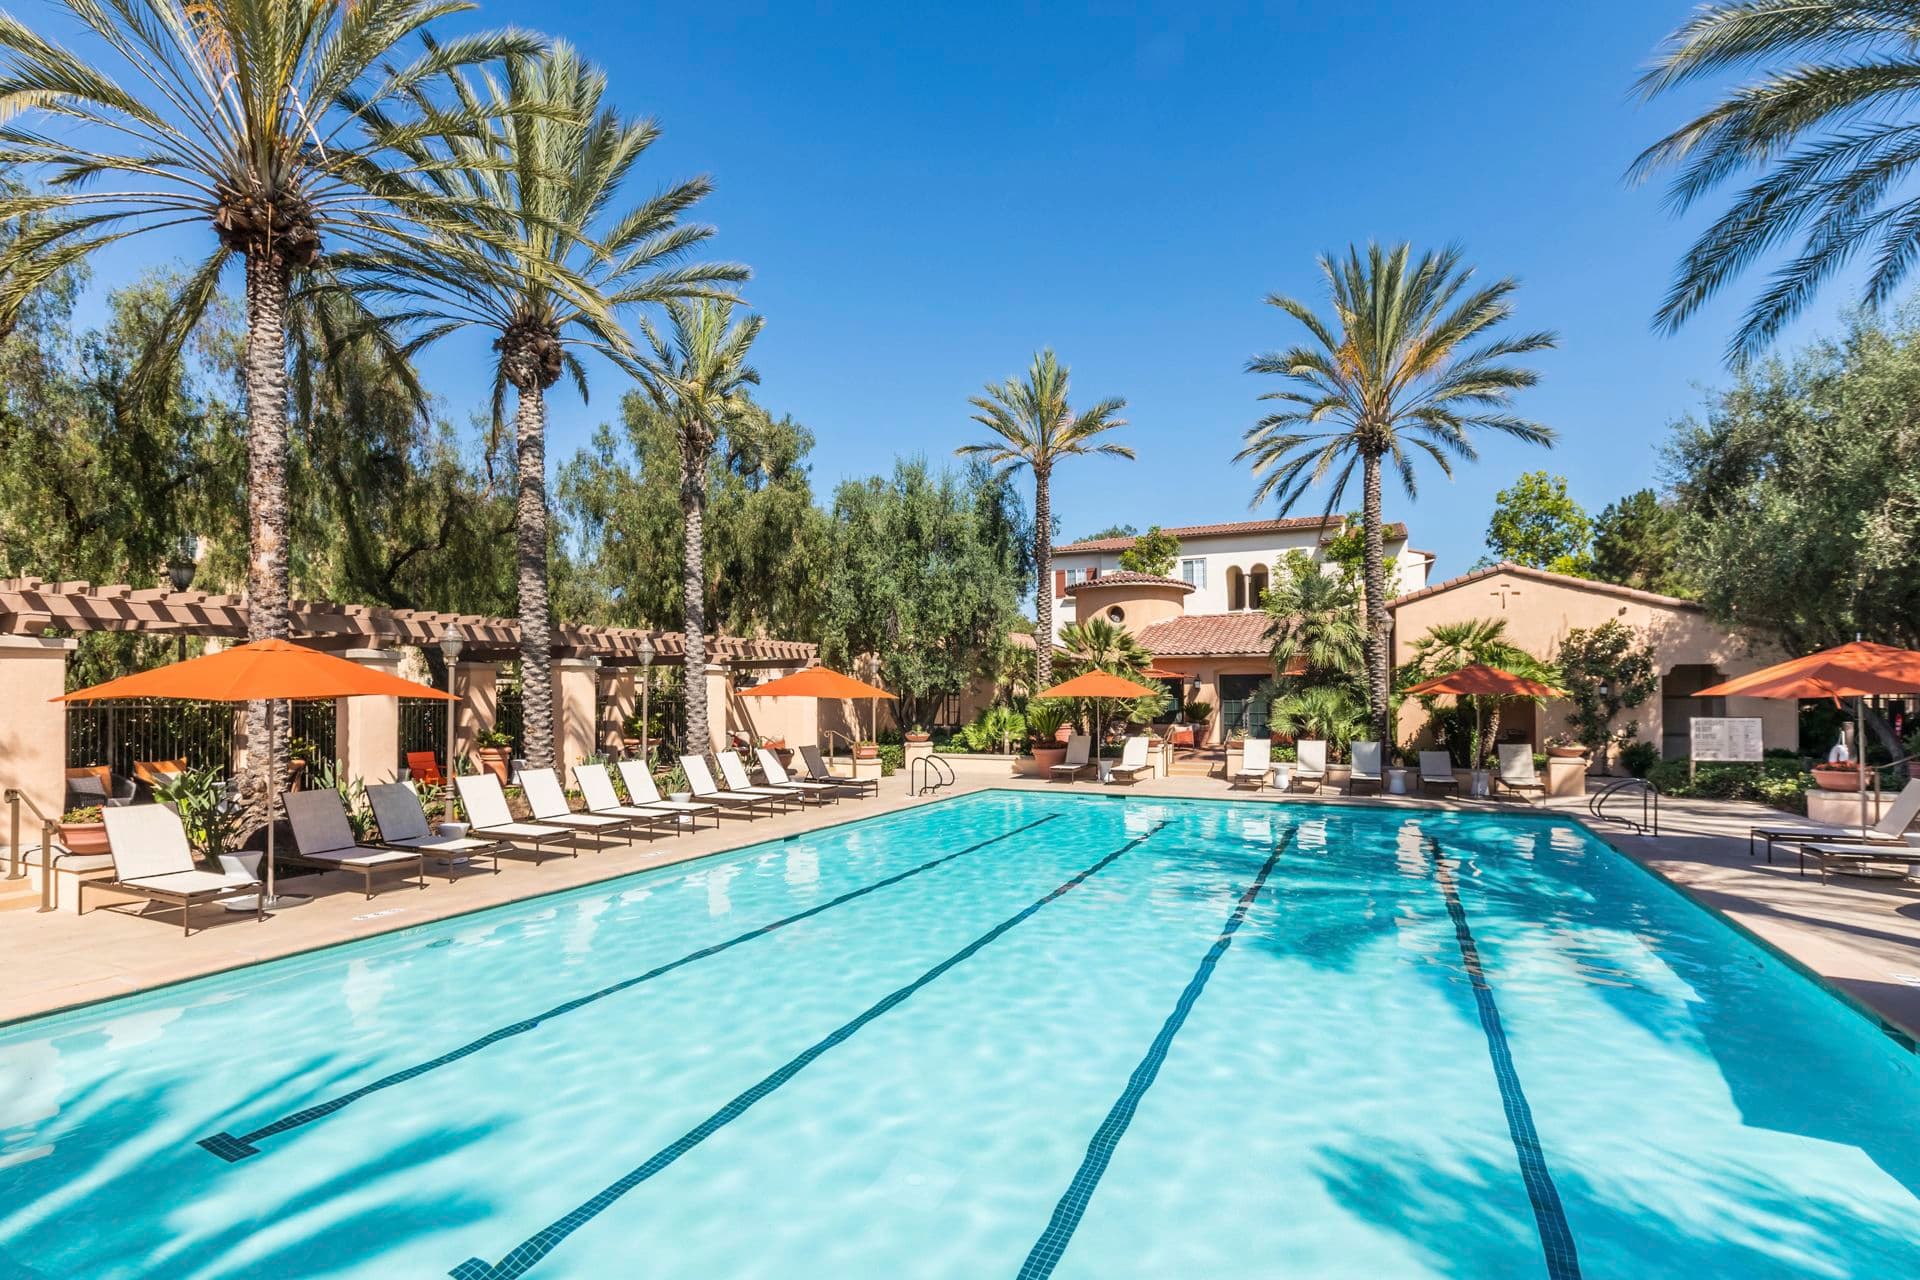 Pool view at Anacapa Apartment Homes in Irvine, CA.